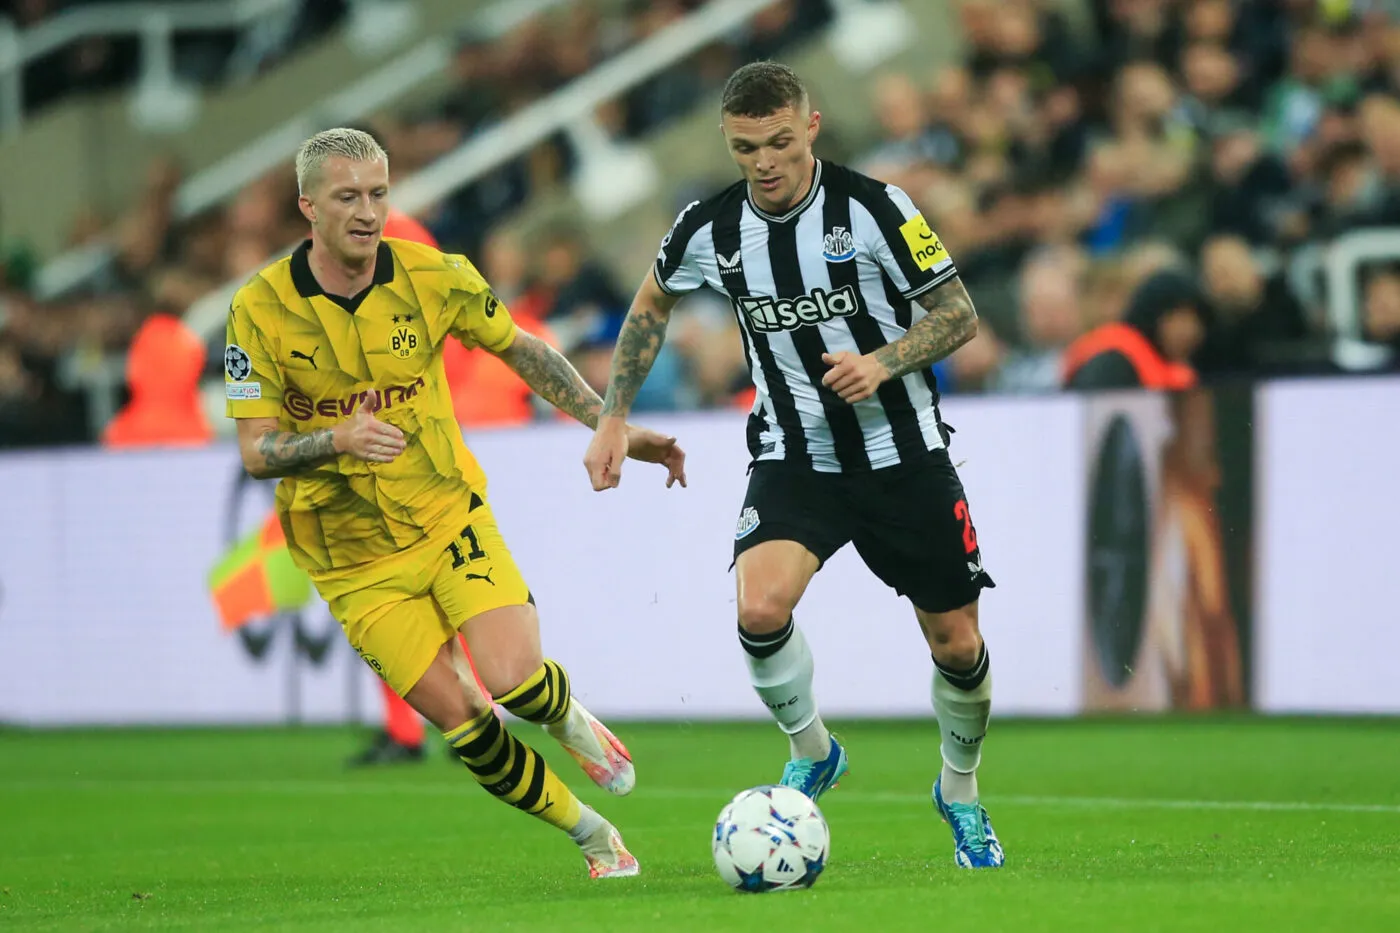 25 October 2023, Great Britain, Newcastle Upon Tyne: Soccer: Champions League, Newcastle United - Borussia Dortmund, Group stage, Group F, Matchday 3 at St. James' Park, Dortmund's Marco Reus (l) and Newcastle's Kieran Trippier fight for the ball. Photo: Lindsey Parnaby/dpa - Photo by Icon sport